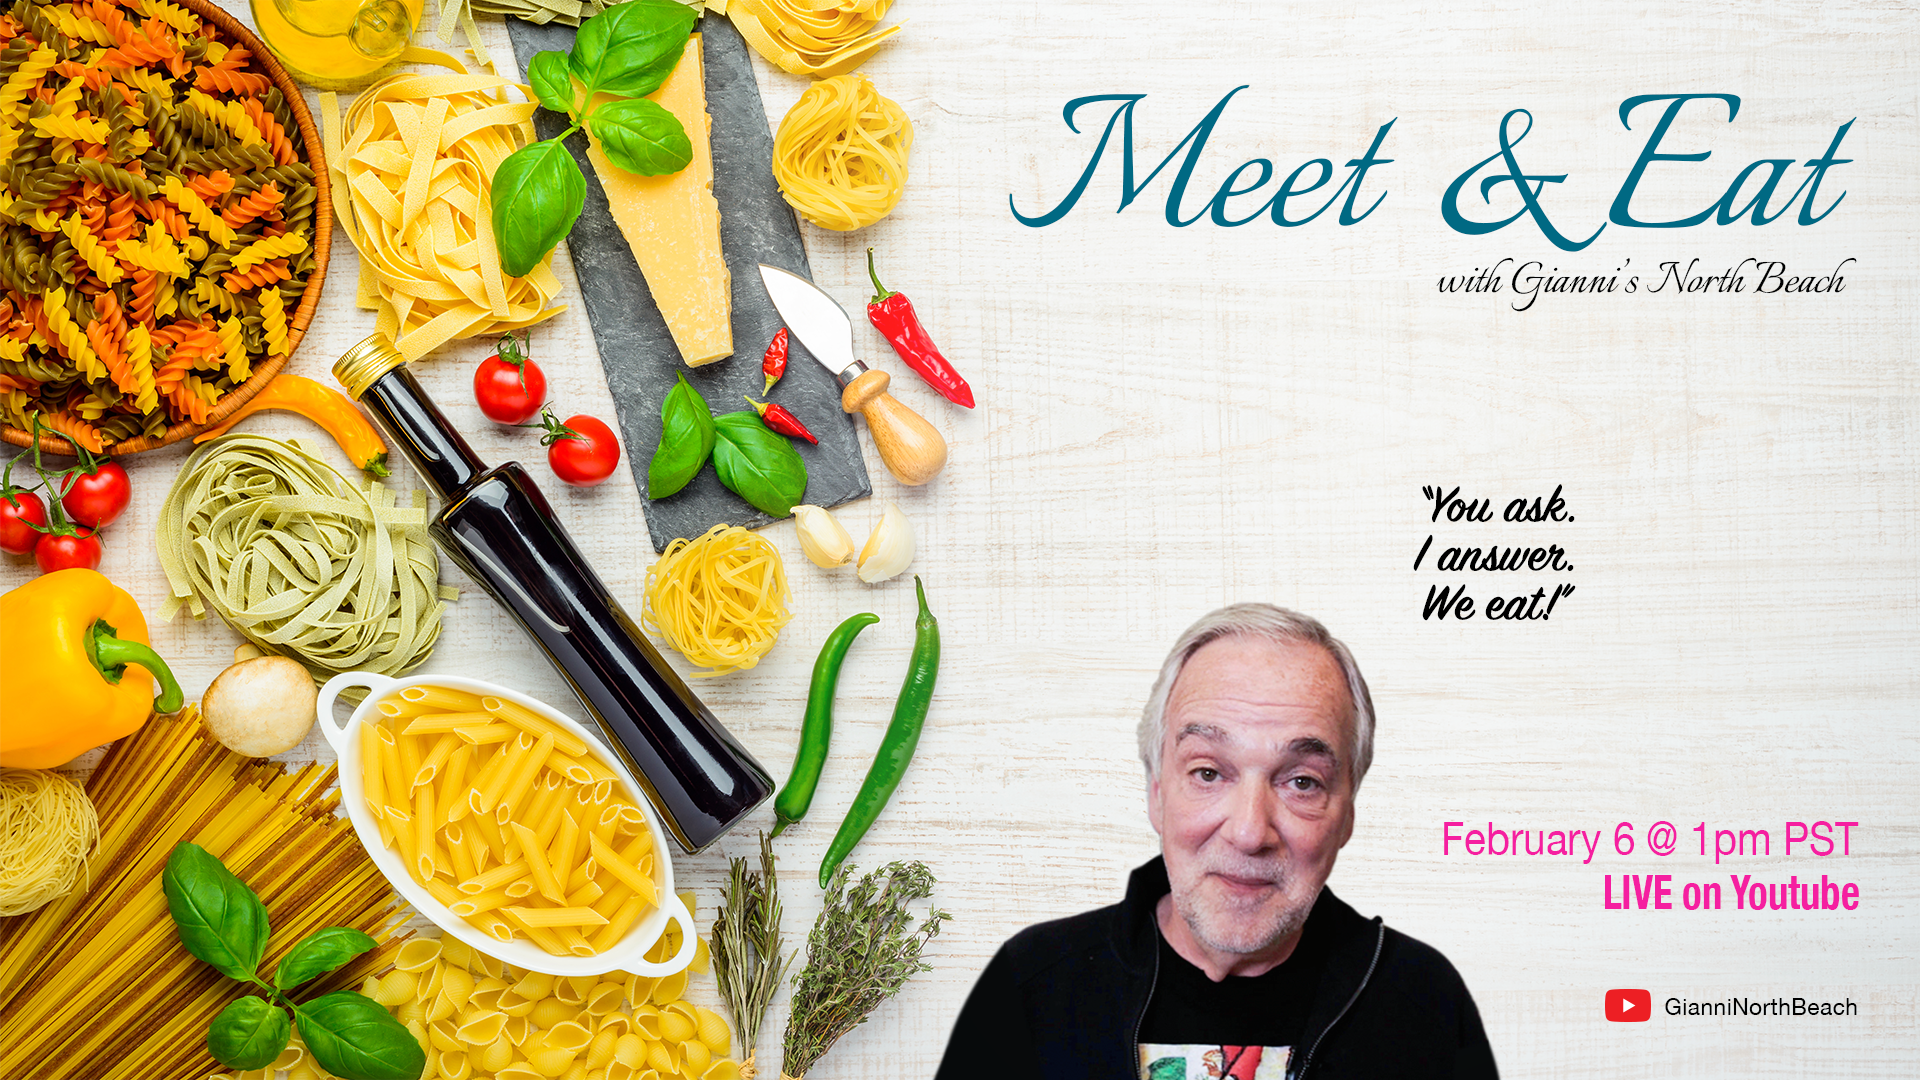 Promo image for Gianni's North Beach Meet & Eat event.